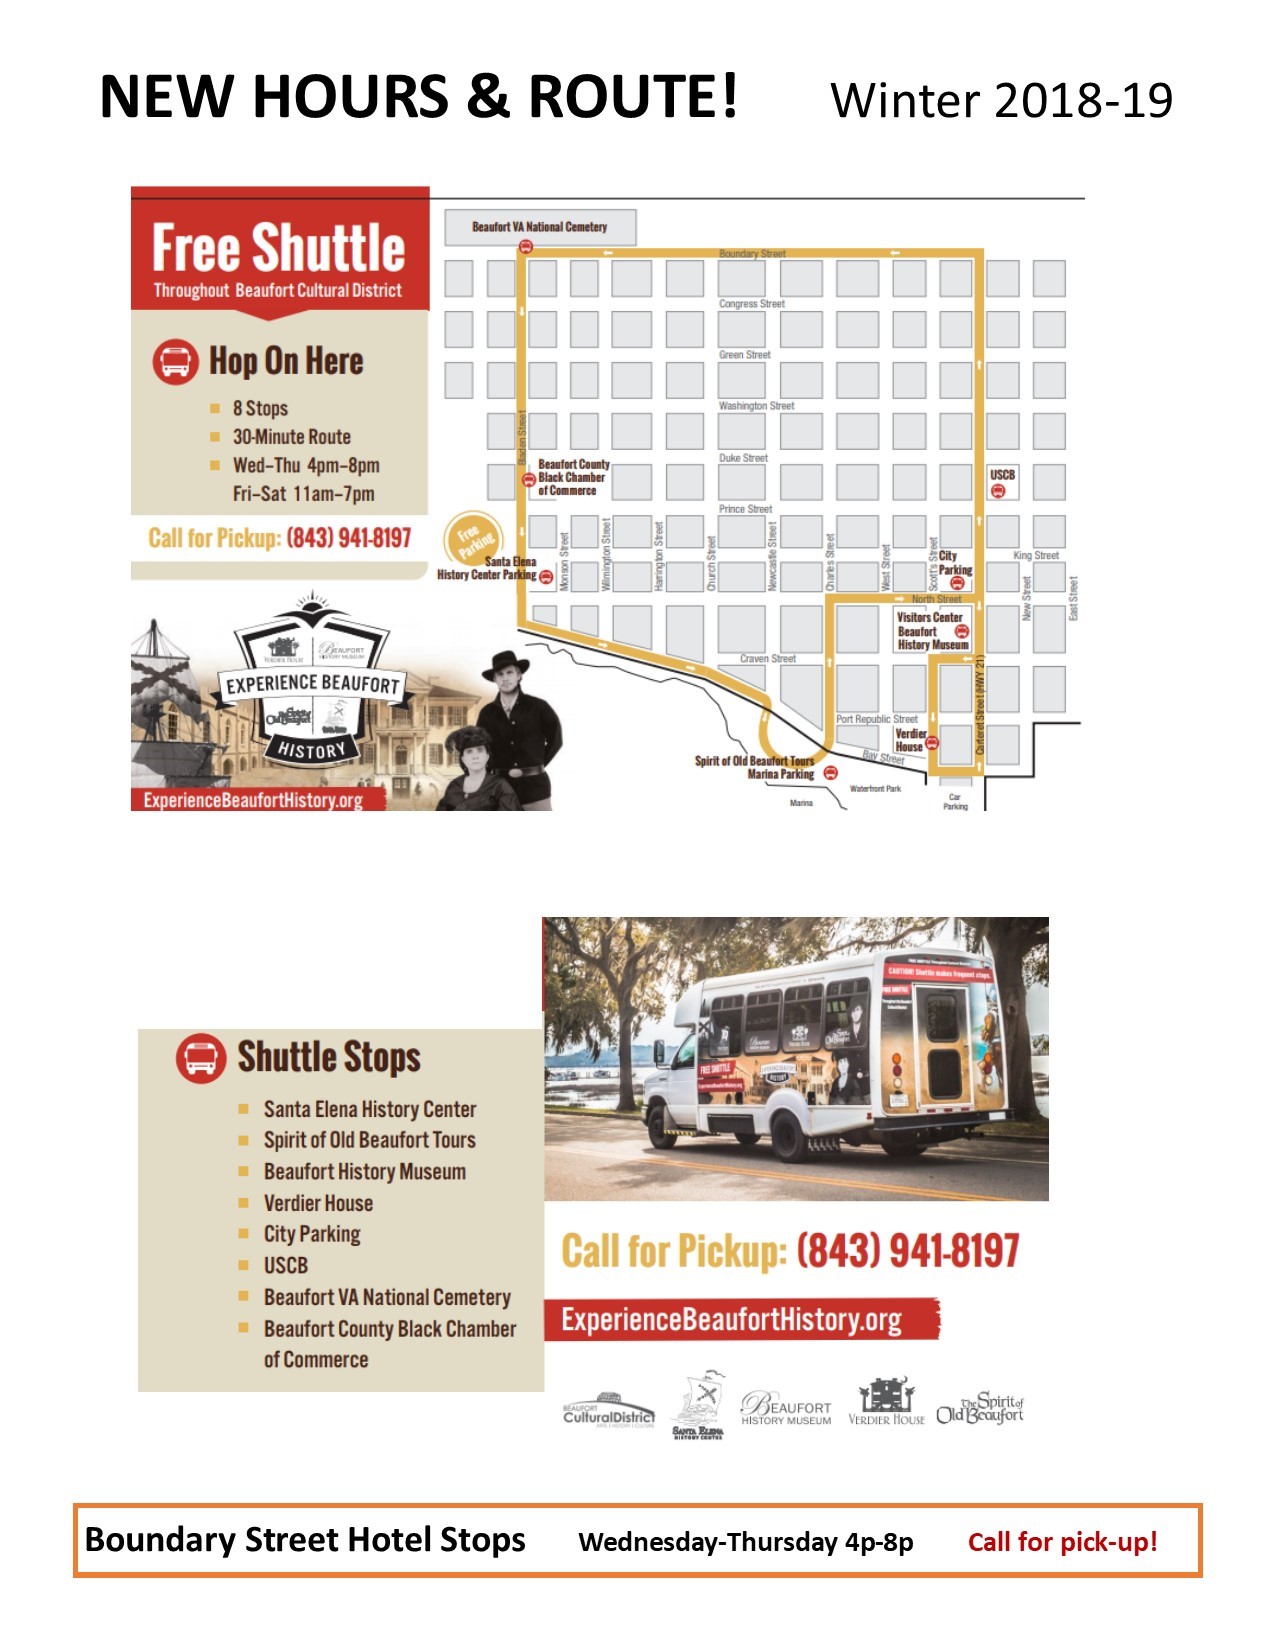 Experience Beaufort History with A Free Shuttle Ride!